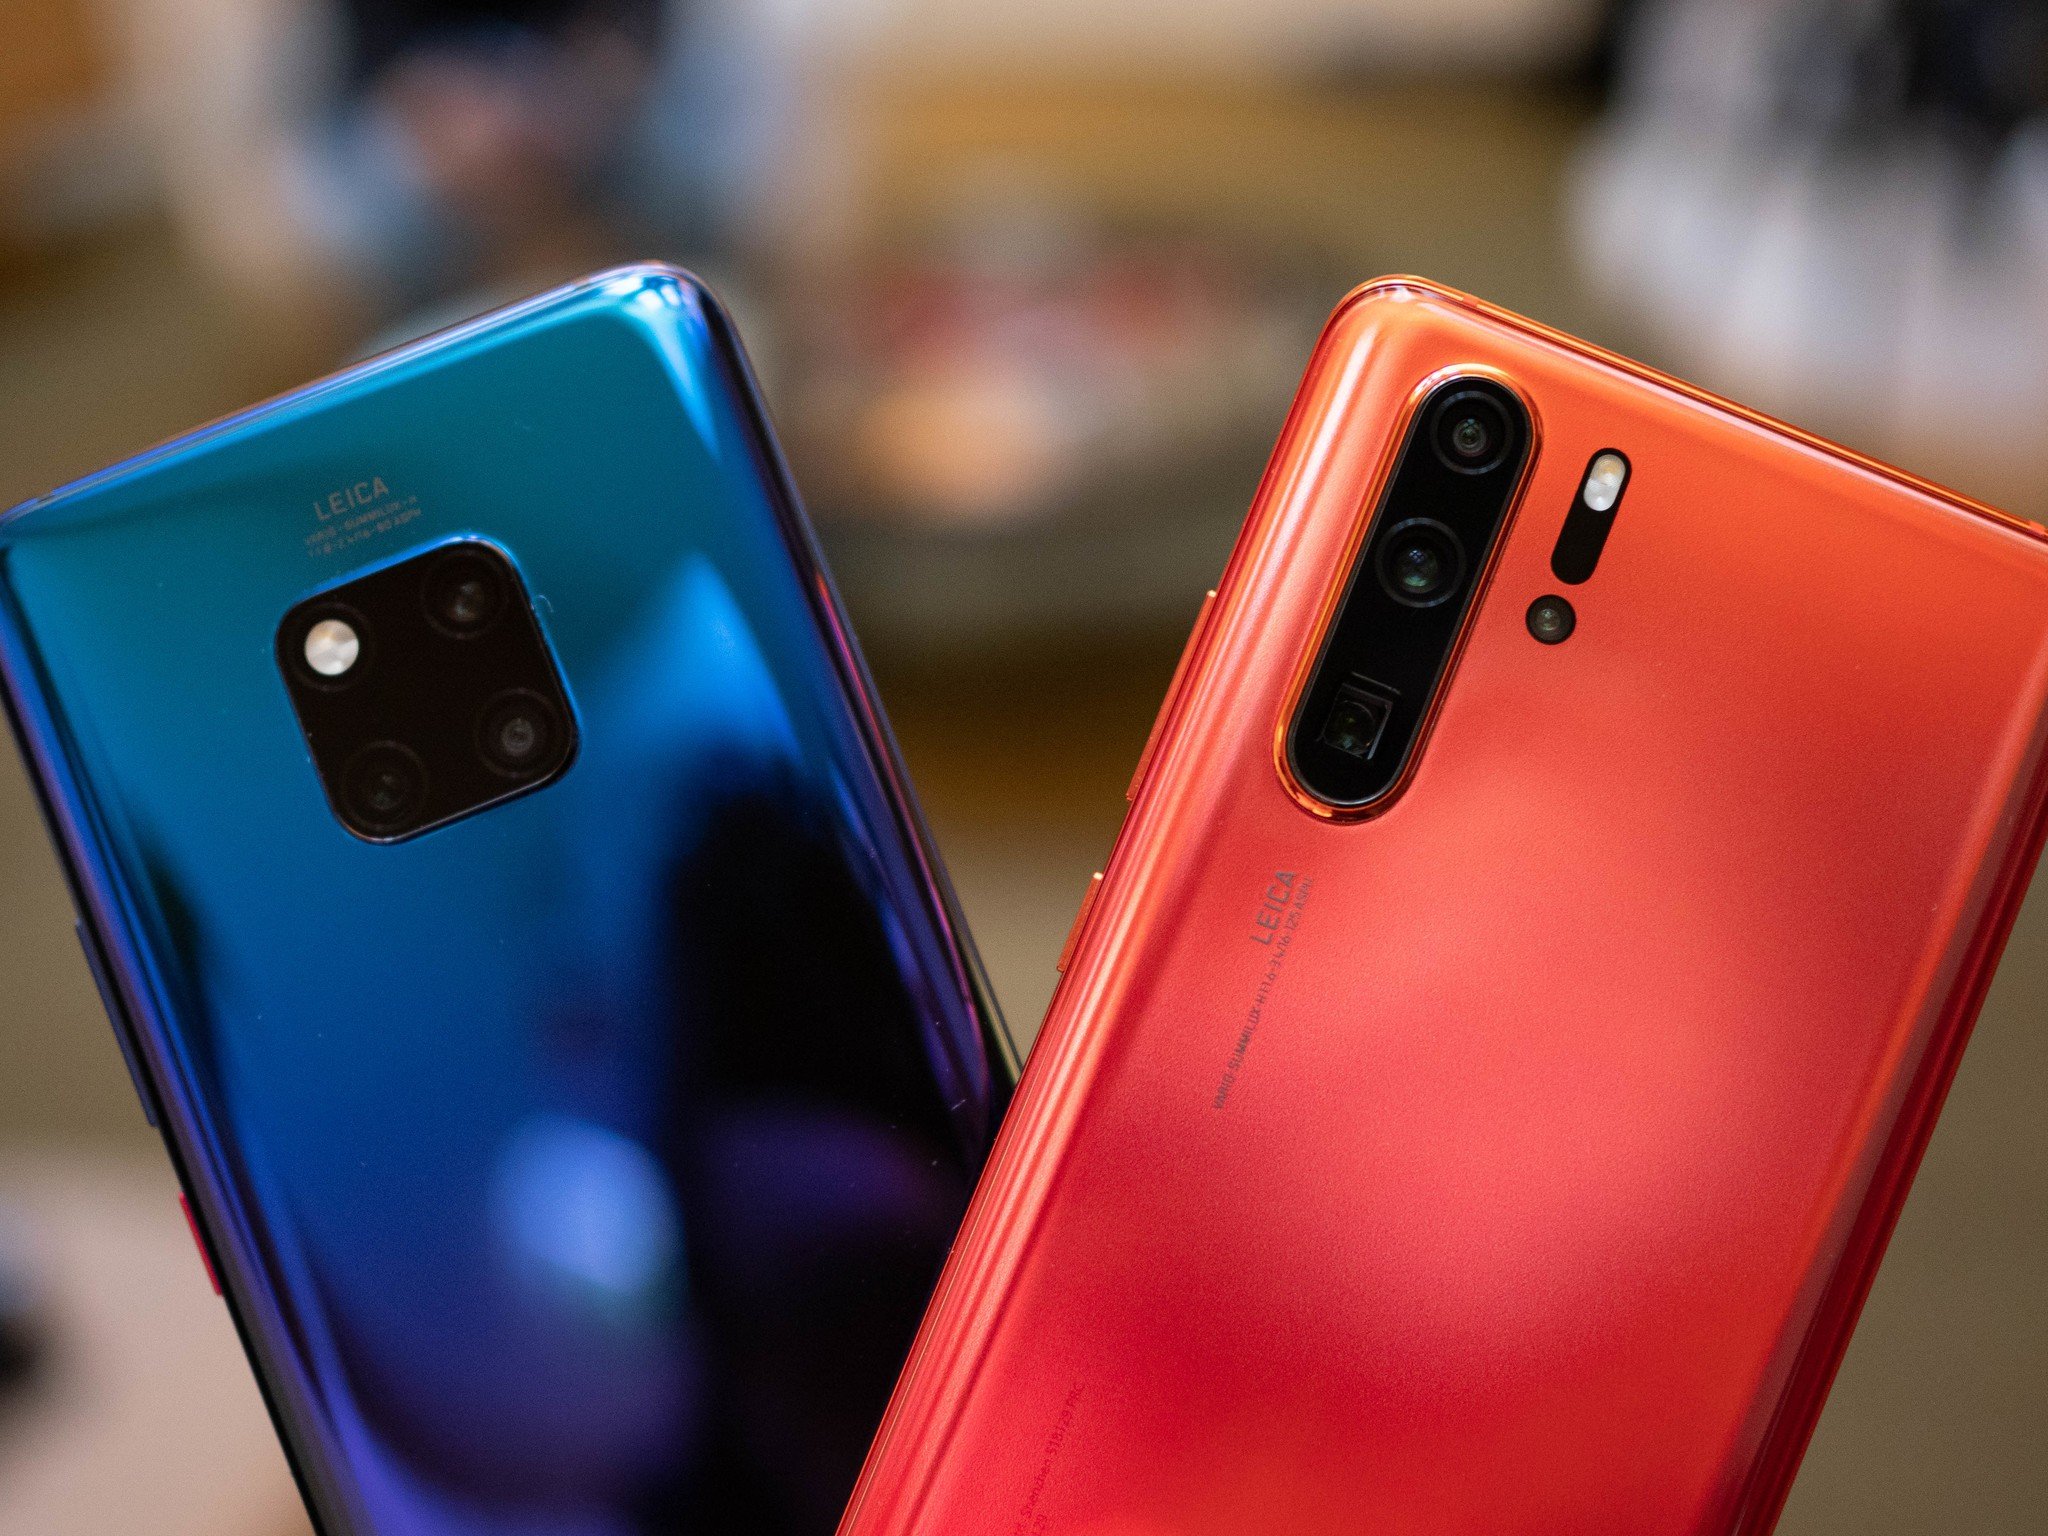 dialect eigendom Menselijk ras Huawei P30 Pro vs. Mate 20 Pro: Which is right for you? | Android Central